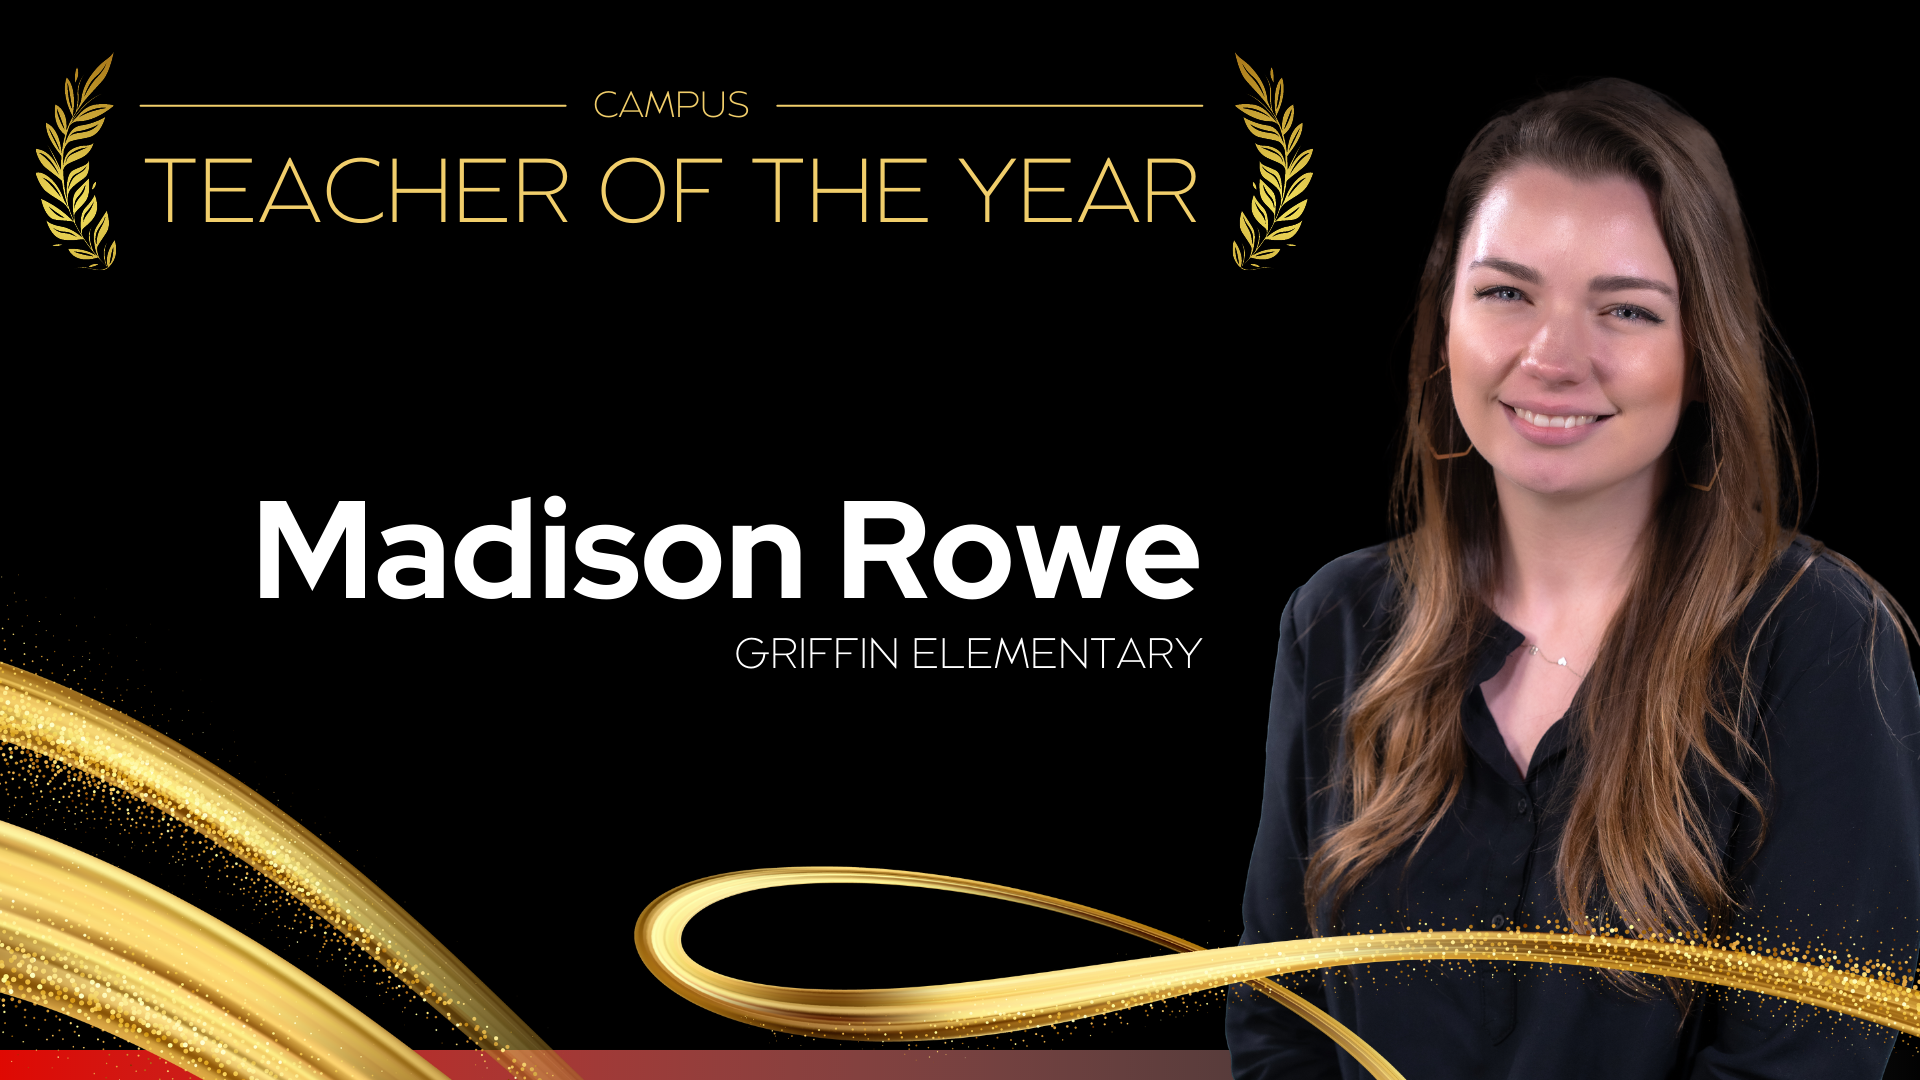 Campus Teacher of the year Griffin Elementary School - Madison Rowe